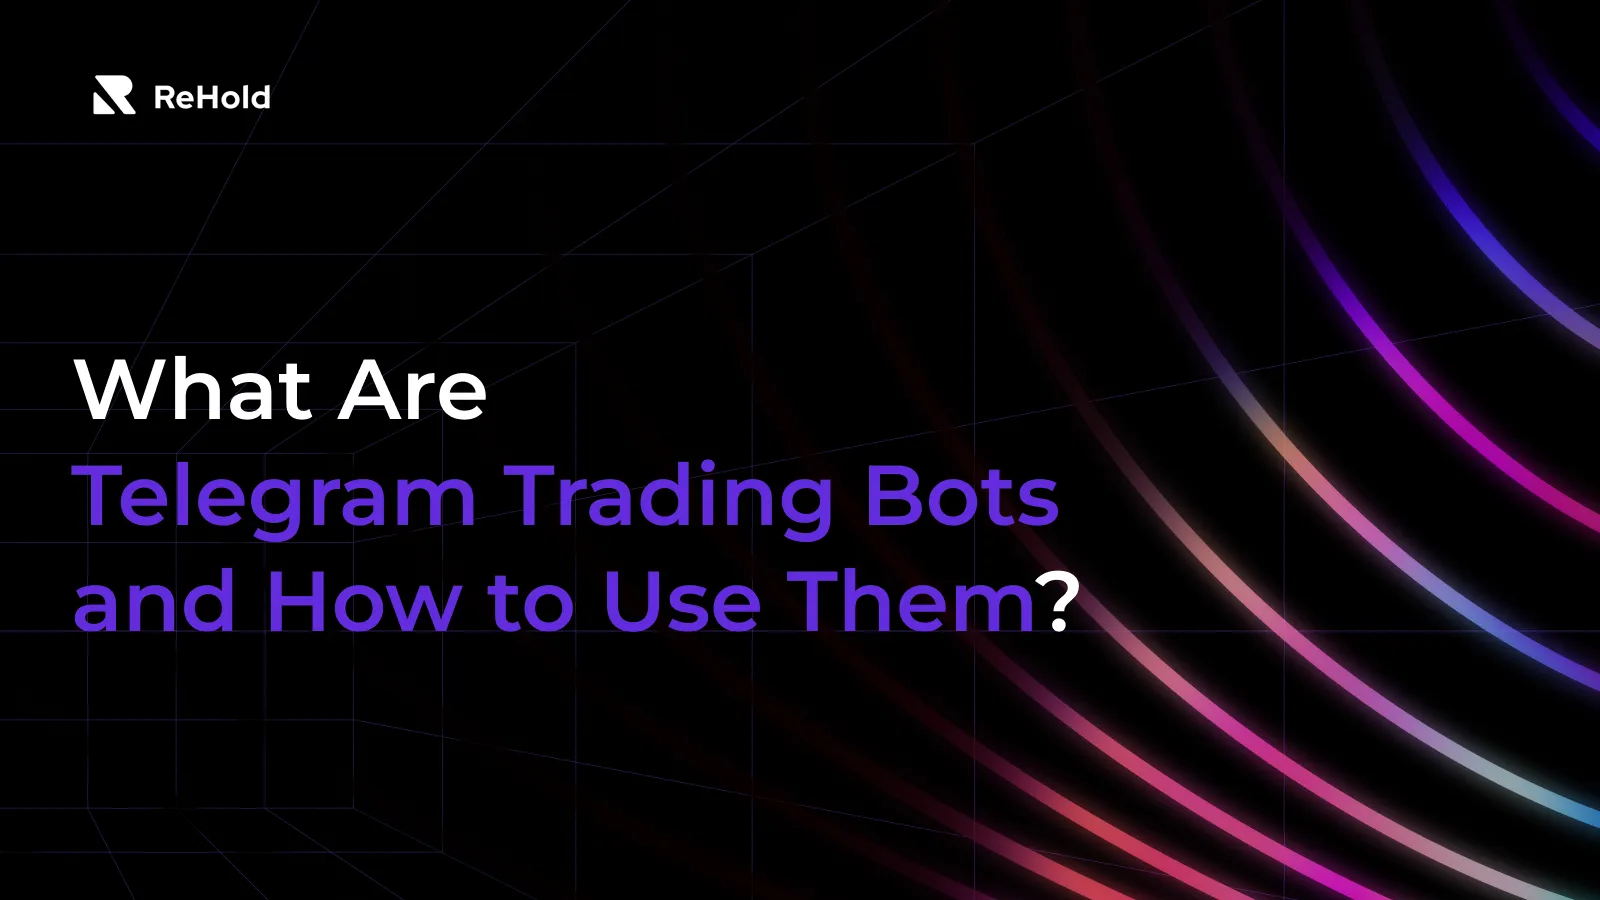 What Are Telegram Trading Bots and How to Use Them?